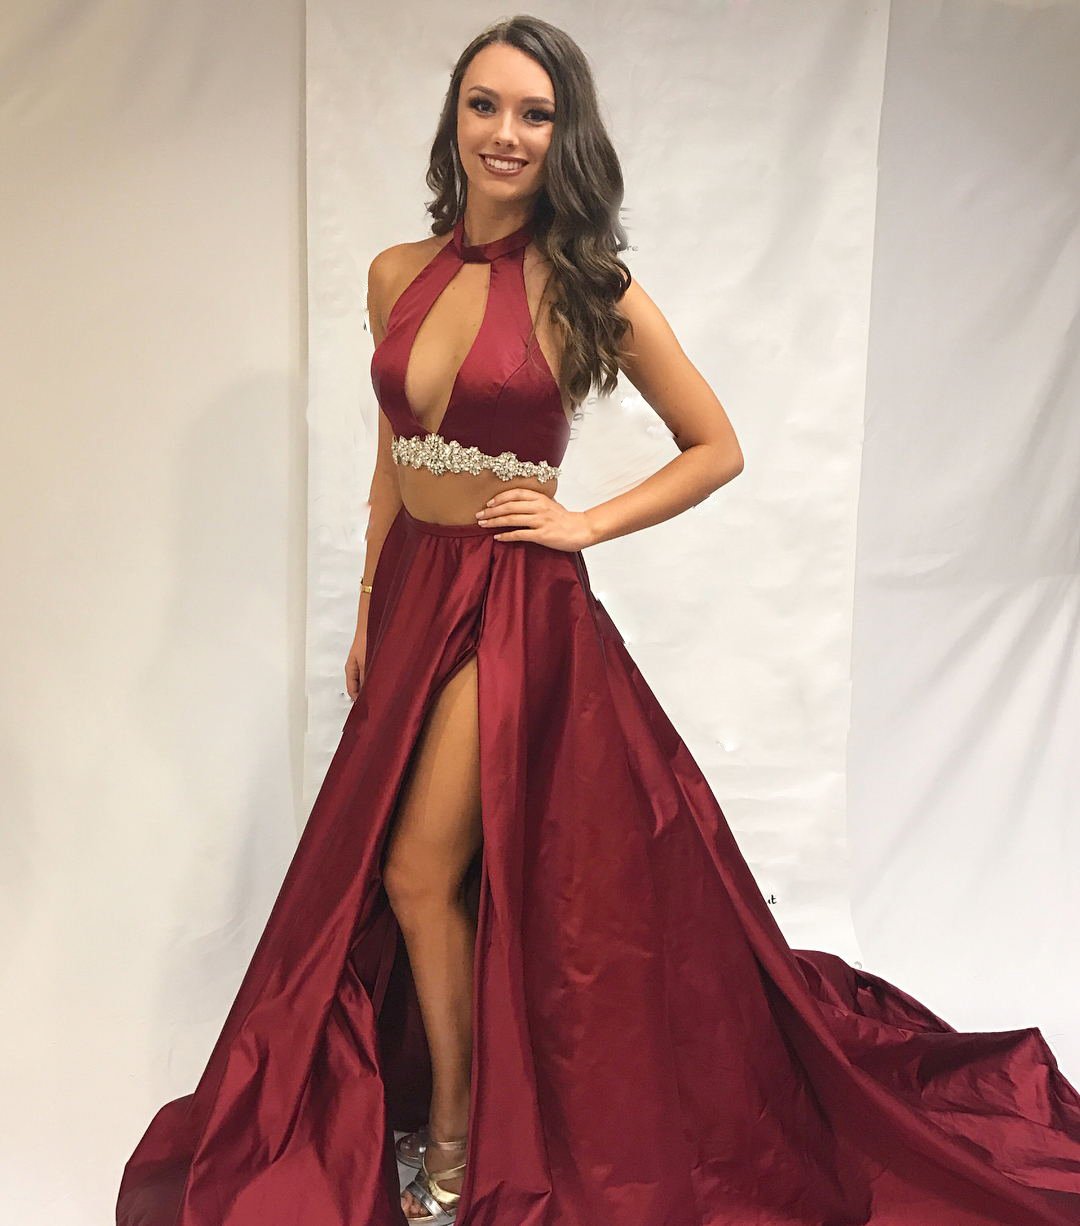 sexiest prom dresses ever